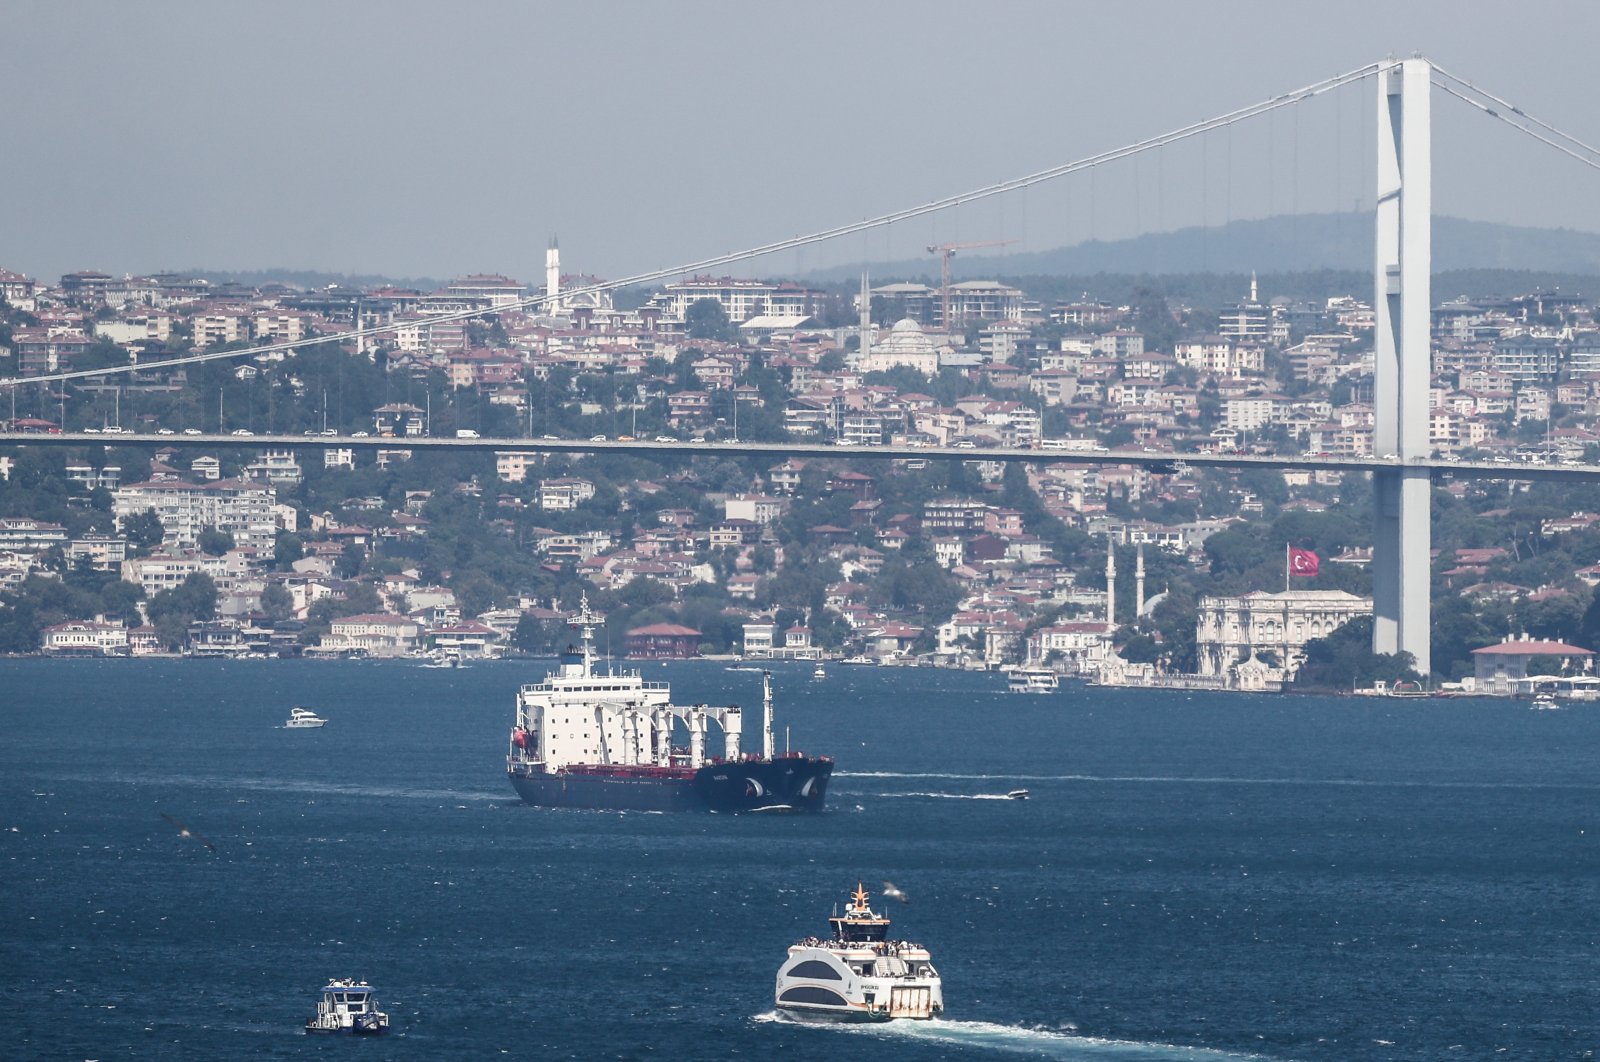 The Sierra Leone-flagged cargo ship Razoni, which left the port of Odessa with the first grain shipment for export, sails through the Bosporus after an inspection in Istanbul, Turkey, Aug. 3, 2022. (EPA Photo)